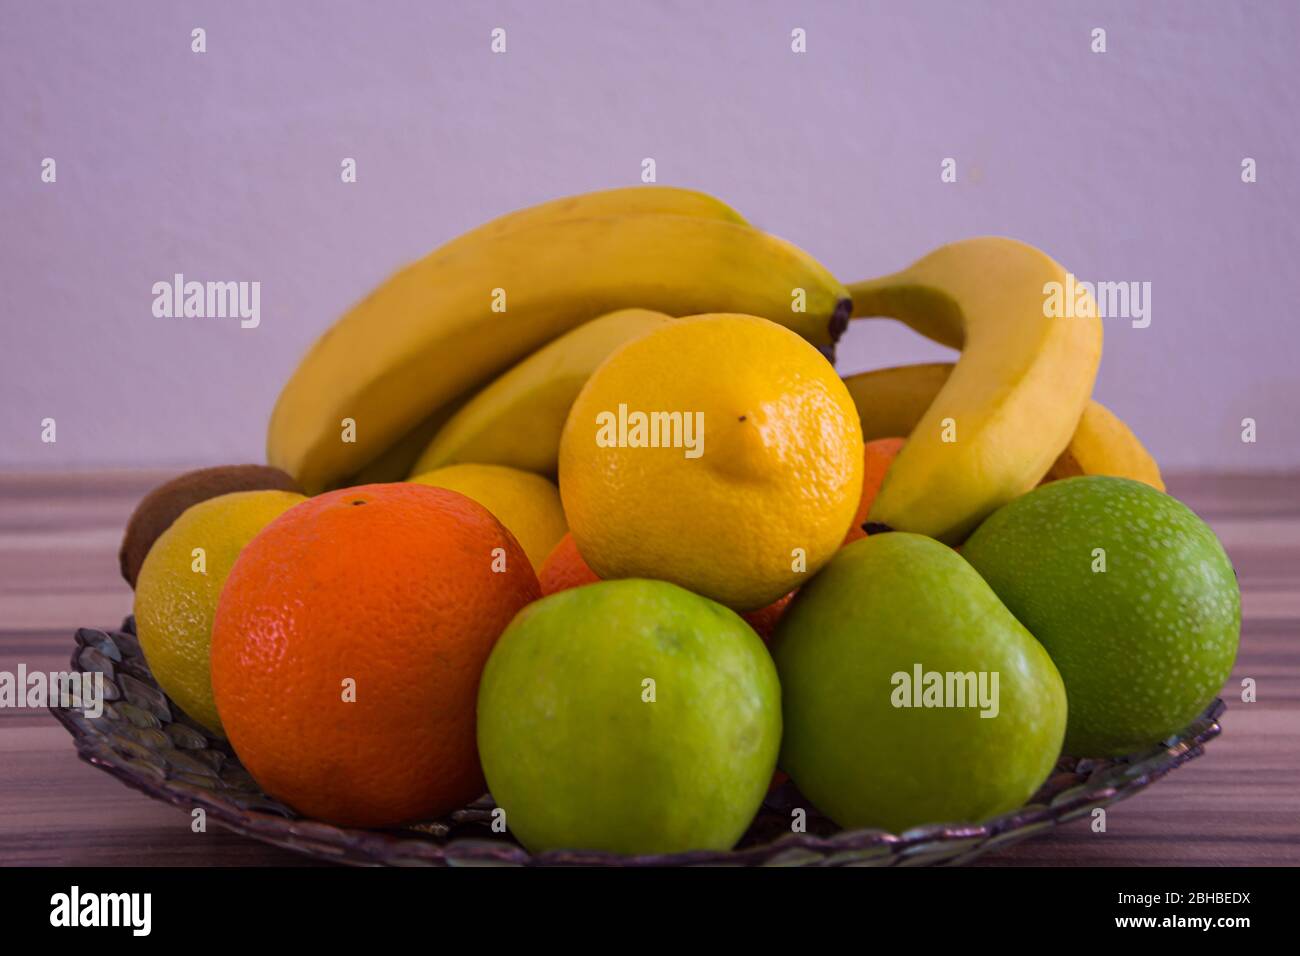 Apples Oranges Bananas Hi Res Stock Photography And Images Alamy